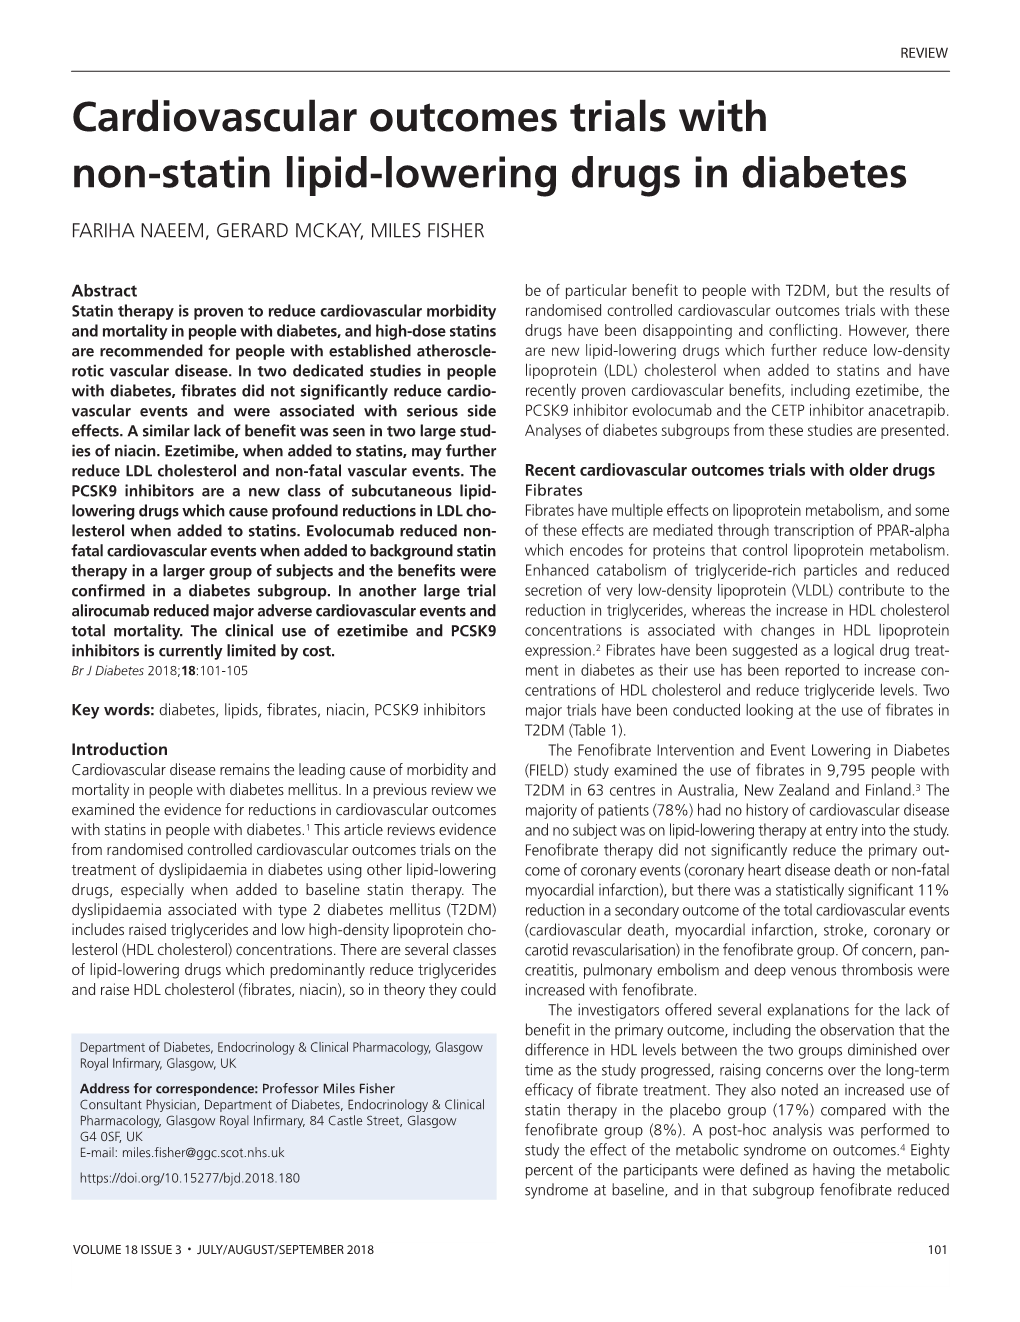 Cardiovascular Outcomes Trials with Non-Statin Lipid-Lowering Drugs in Diabetes